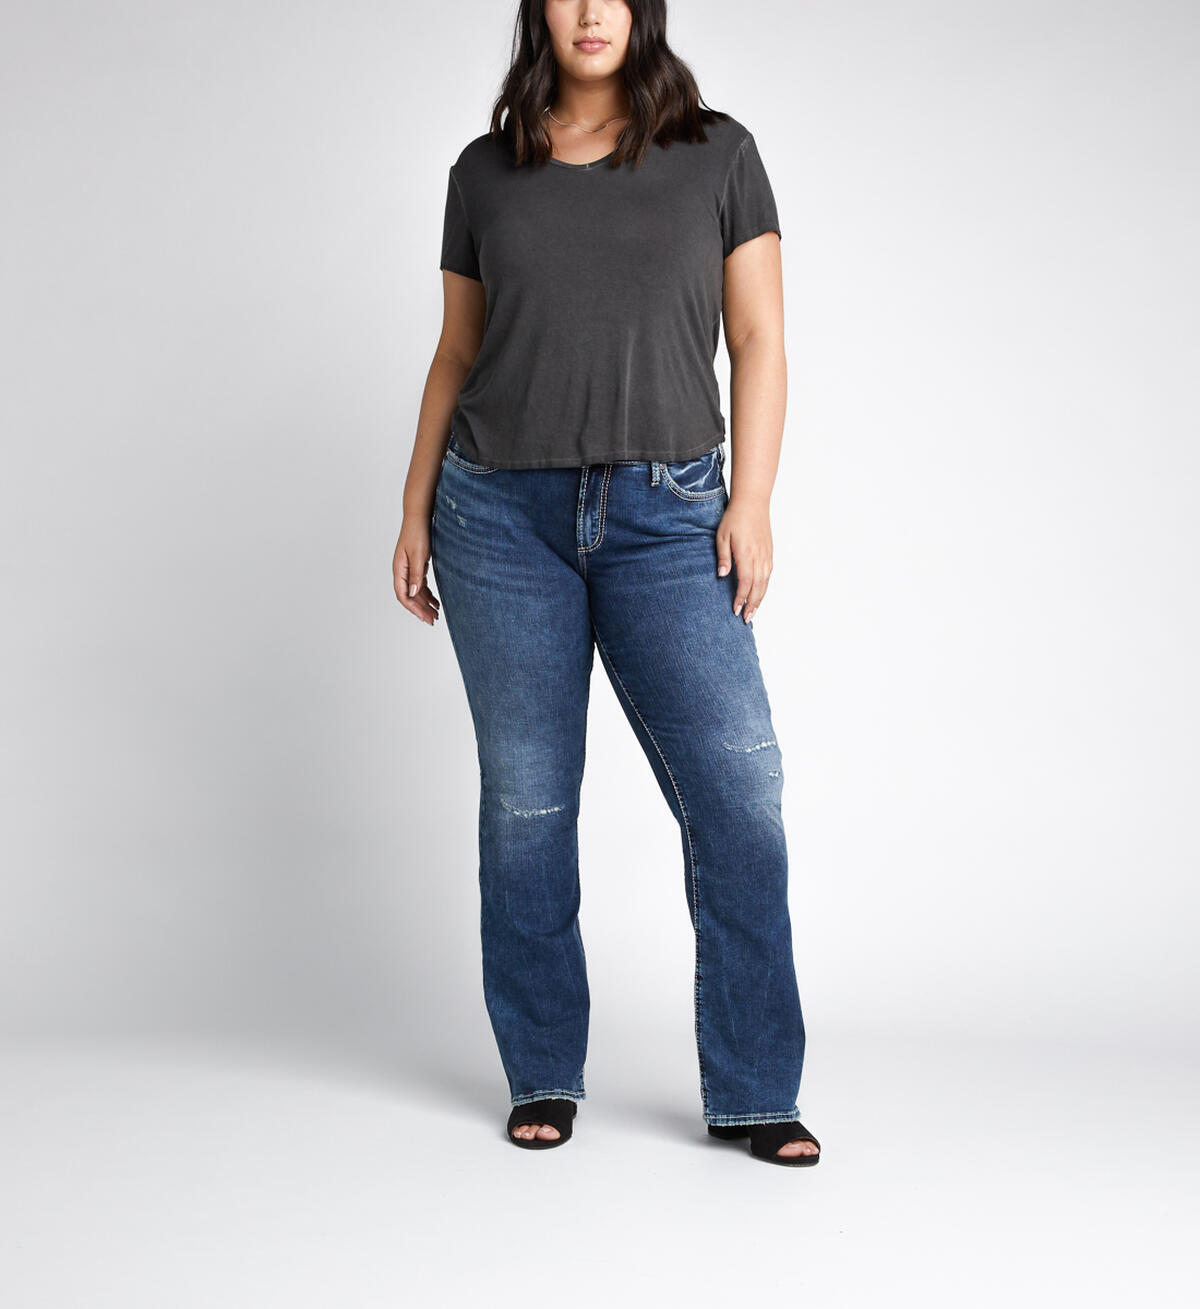 Elyse Mid Rise Bootcut Jeans, , hi-res image number 3